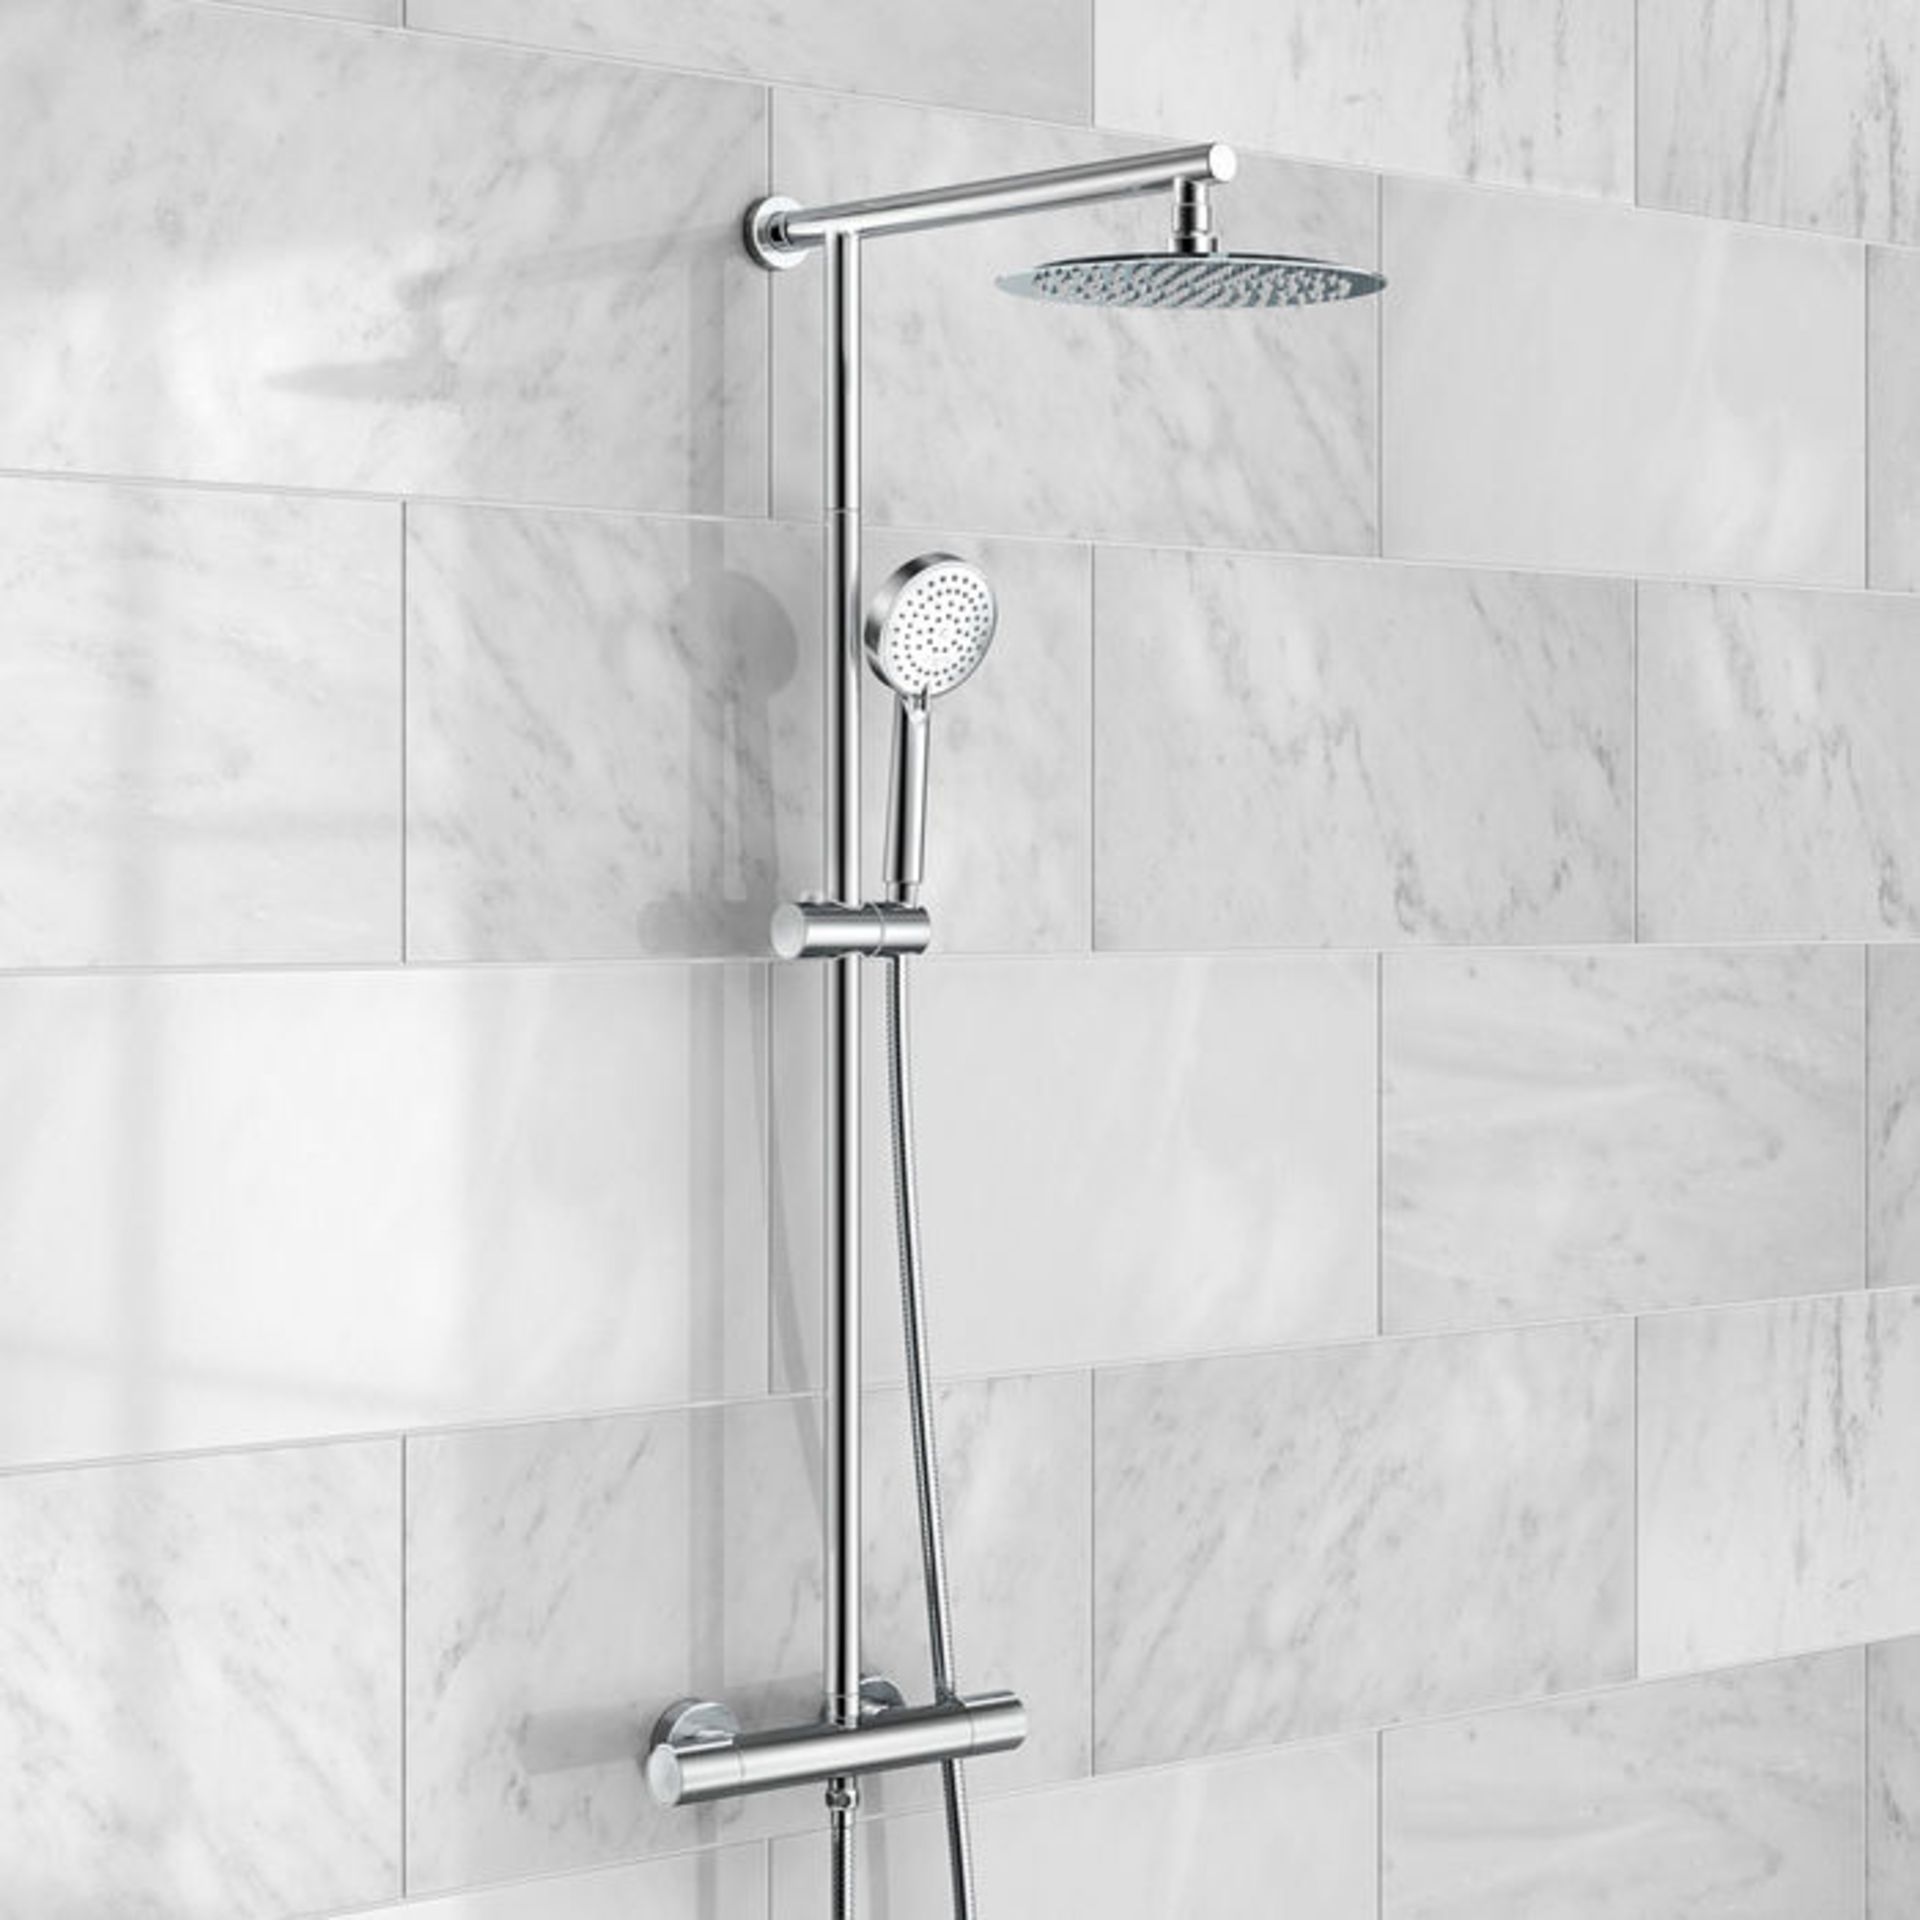 (L41) 250mm Large Round Head Thermostatic Exposed Shower Kit & Handheld. Luxurious larger head for a - Image 2 of 3